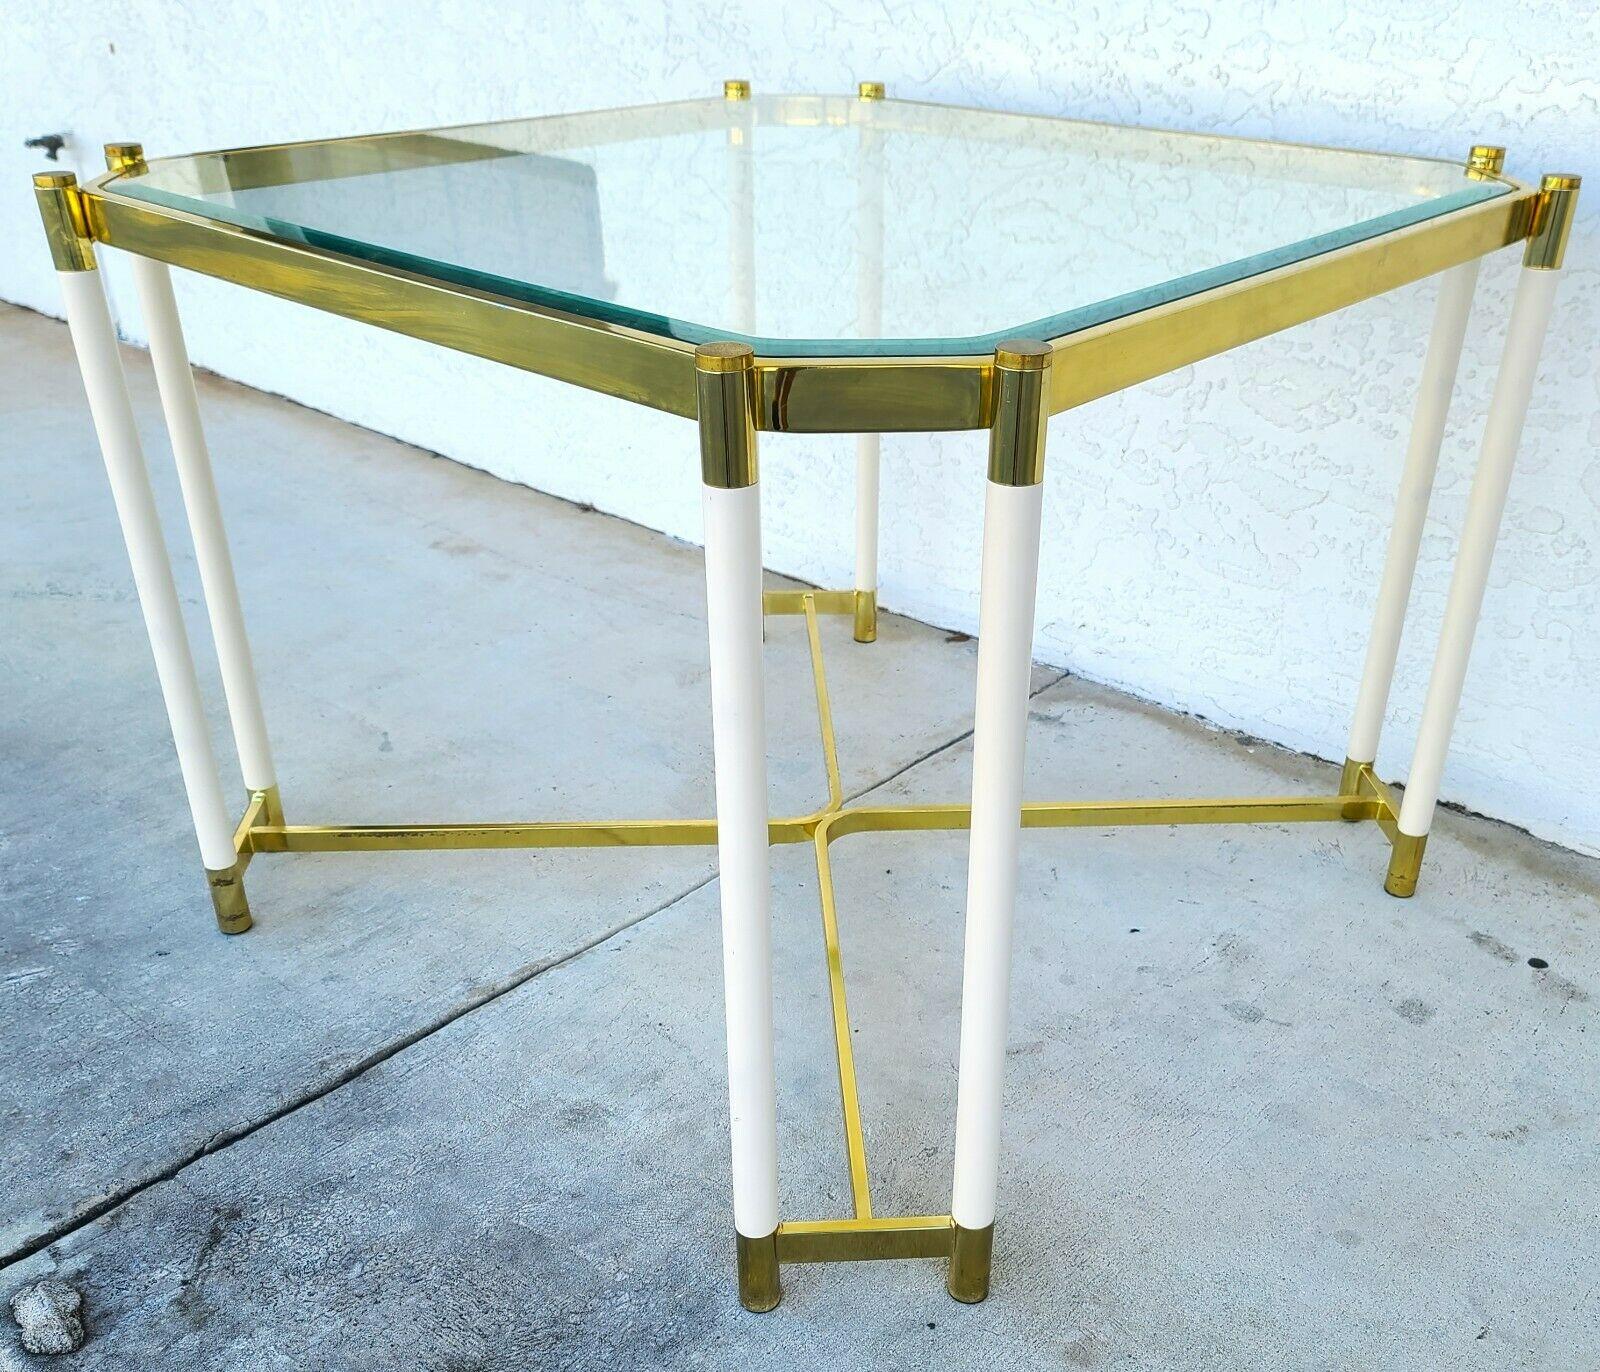 Offering one of our recent palm beach estate fine furniture acquisitions of a brass & glass dining game table by Design Institute of America (DIA)
We originally listed this with Milo Baughman as the designer but have since determined that we can't